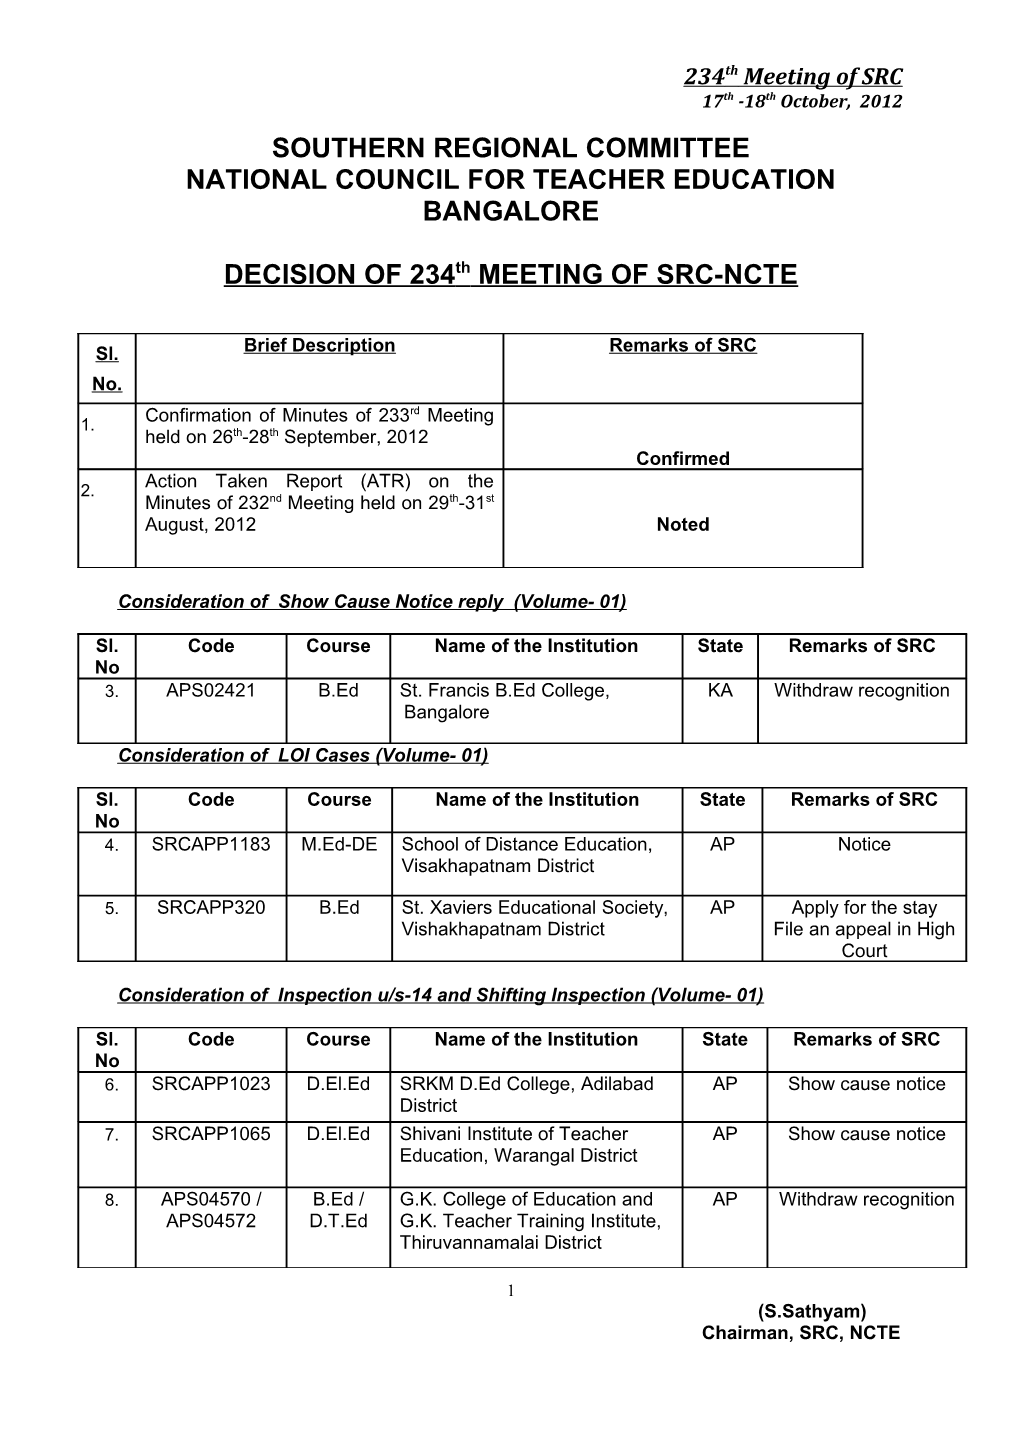 DECISIONS of 234Th MEETING of SRC-NCTE